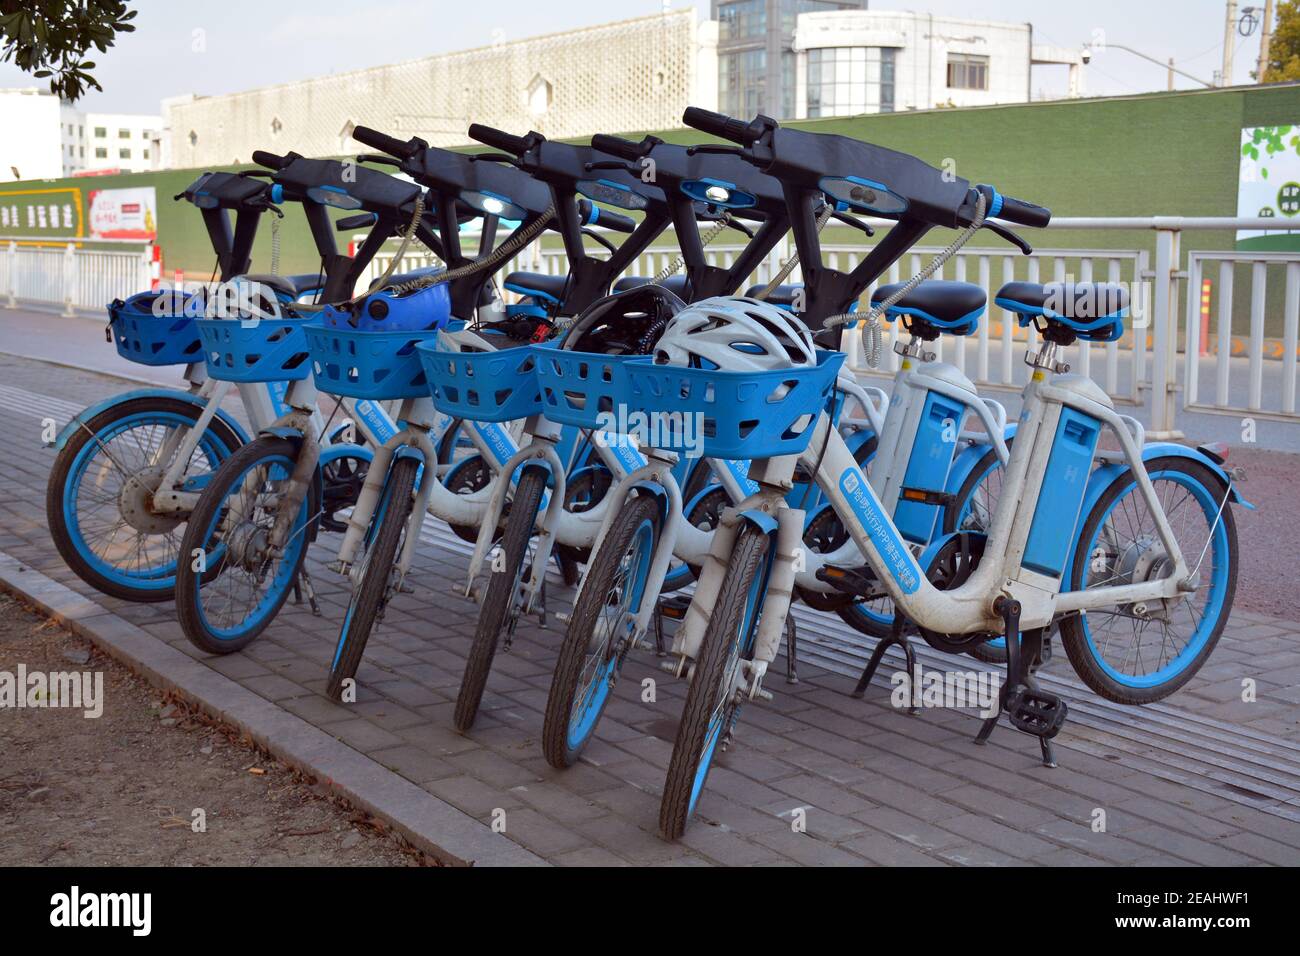 Chinese electric rental bikes on the street in Jiaxing, Zhejiang. Come complete with safety helmet, just scan the barcode to activate and away you go. Stock Photo